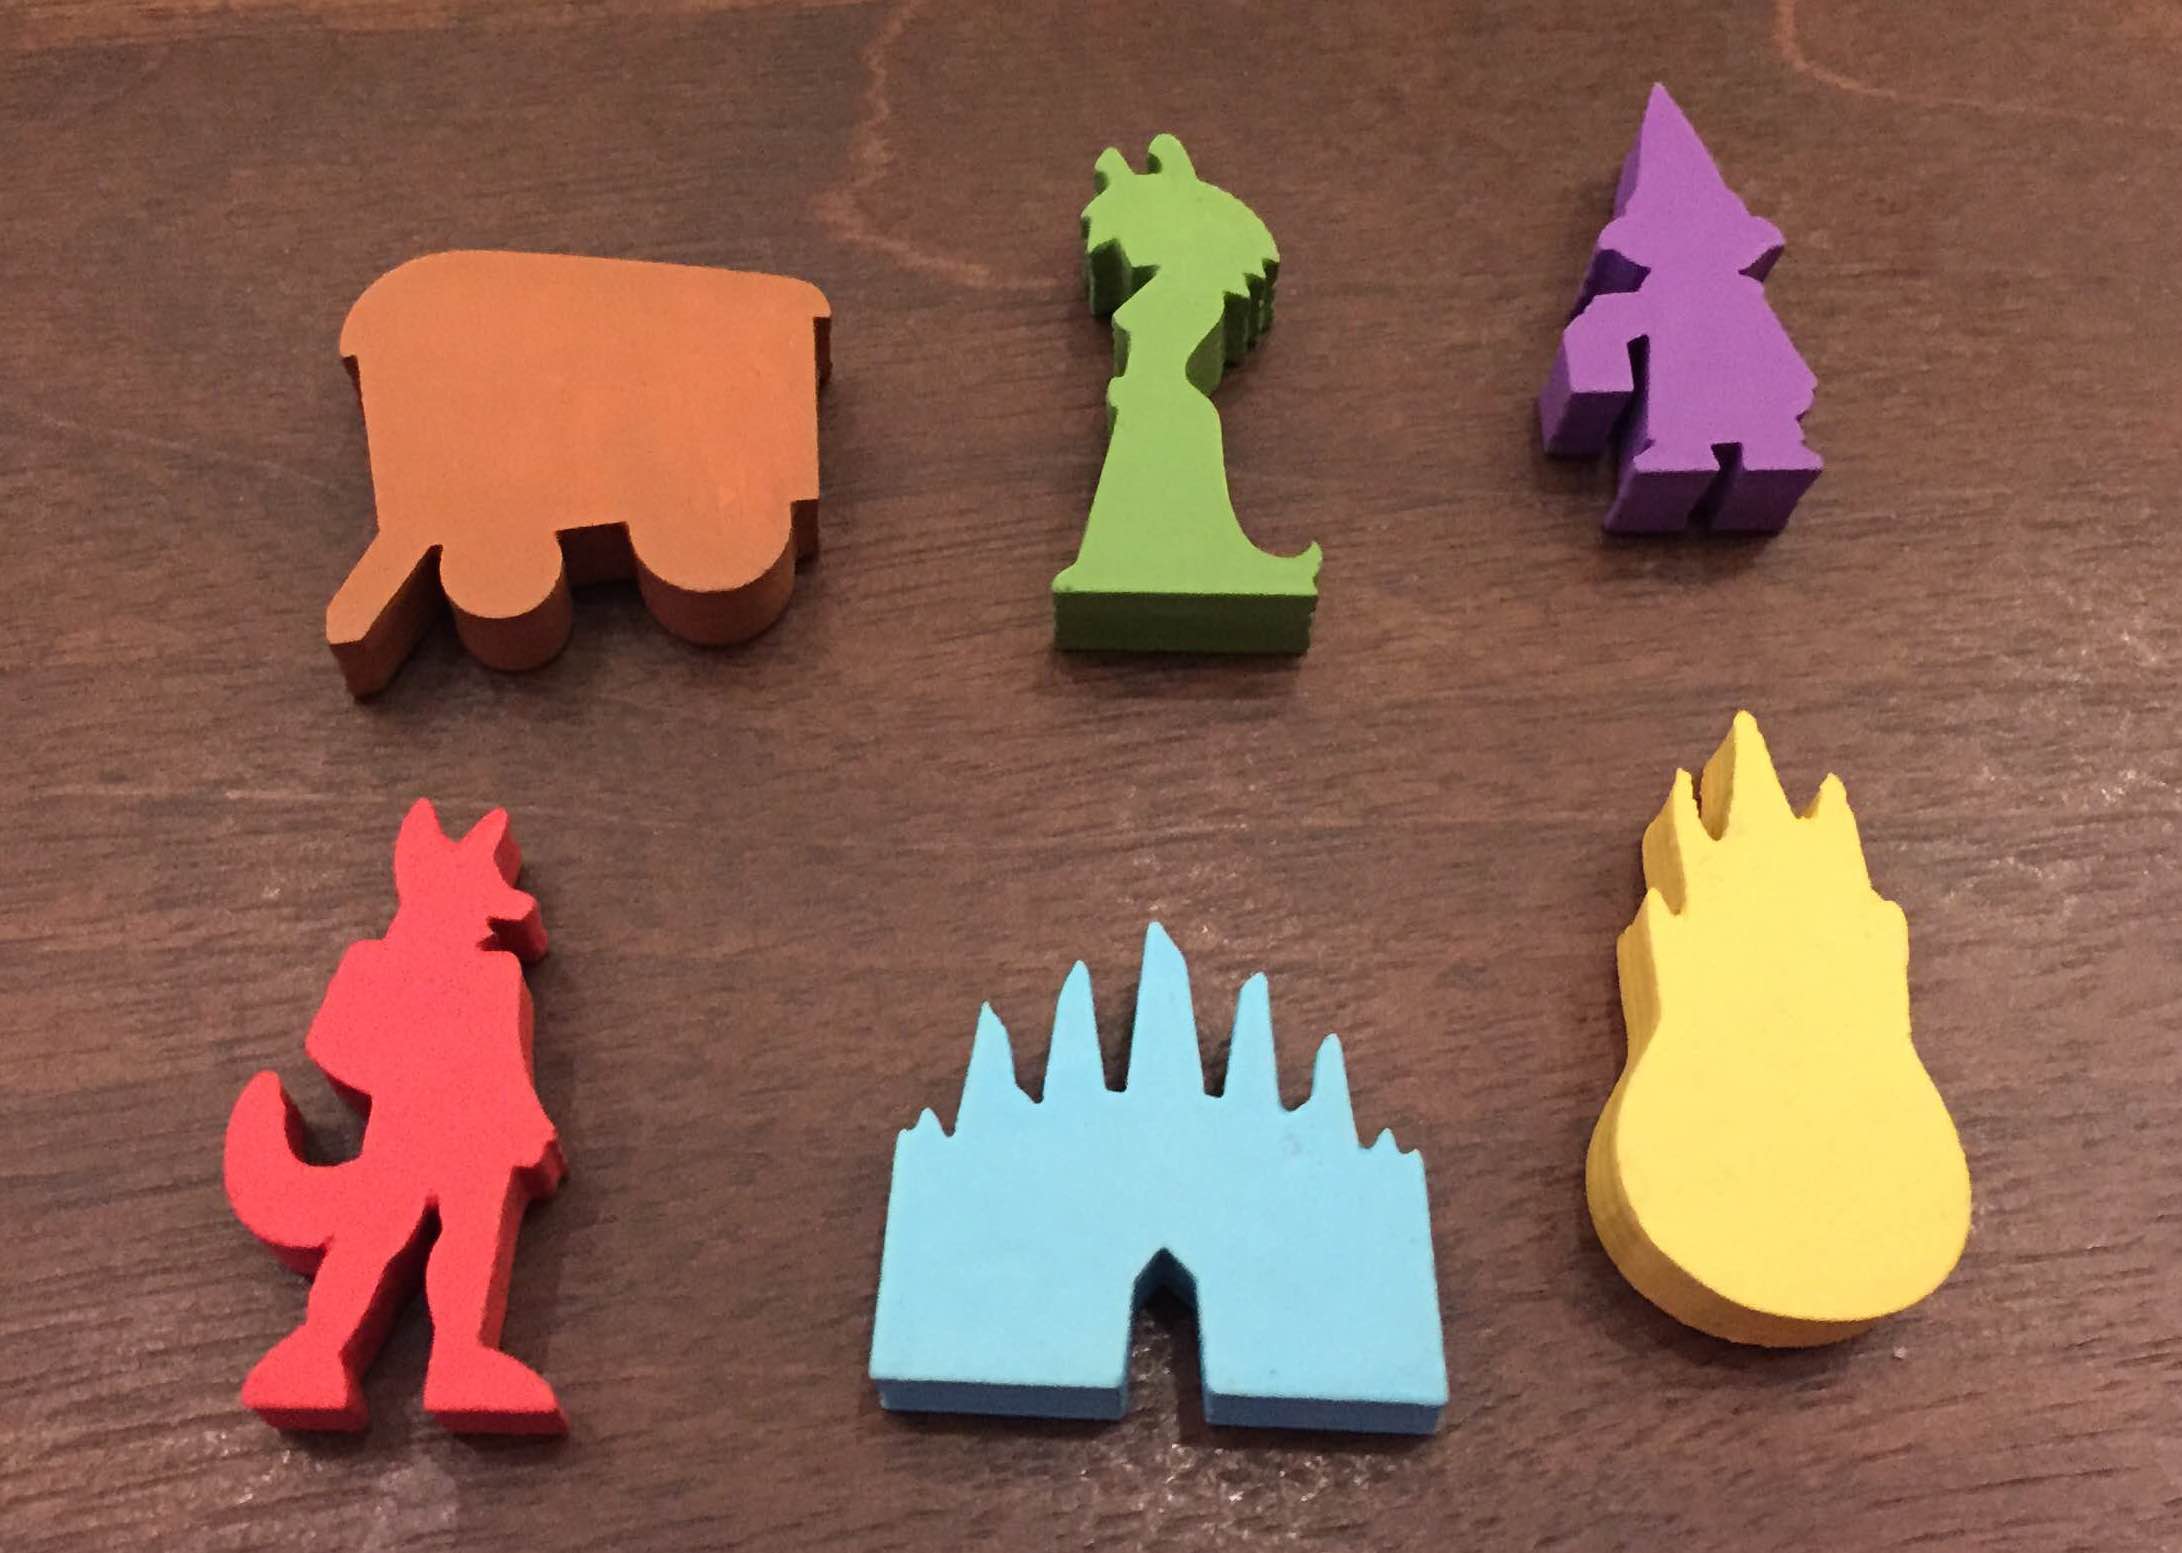 Custom Meeples from the game